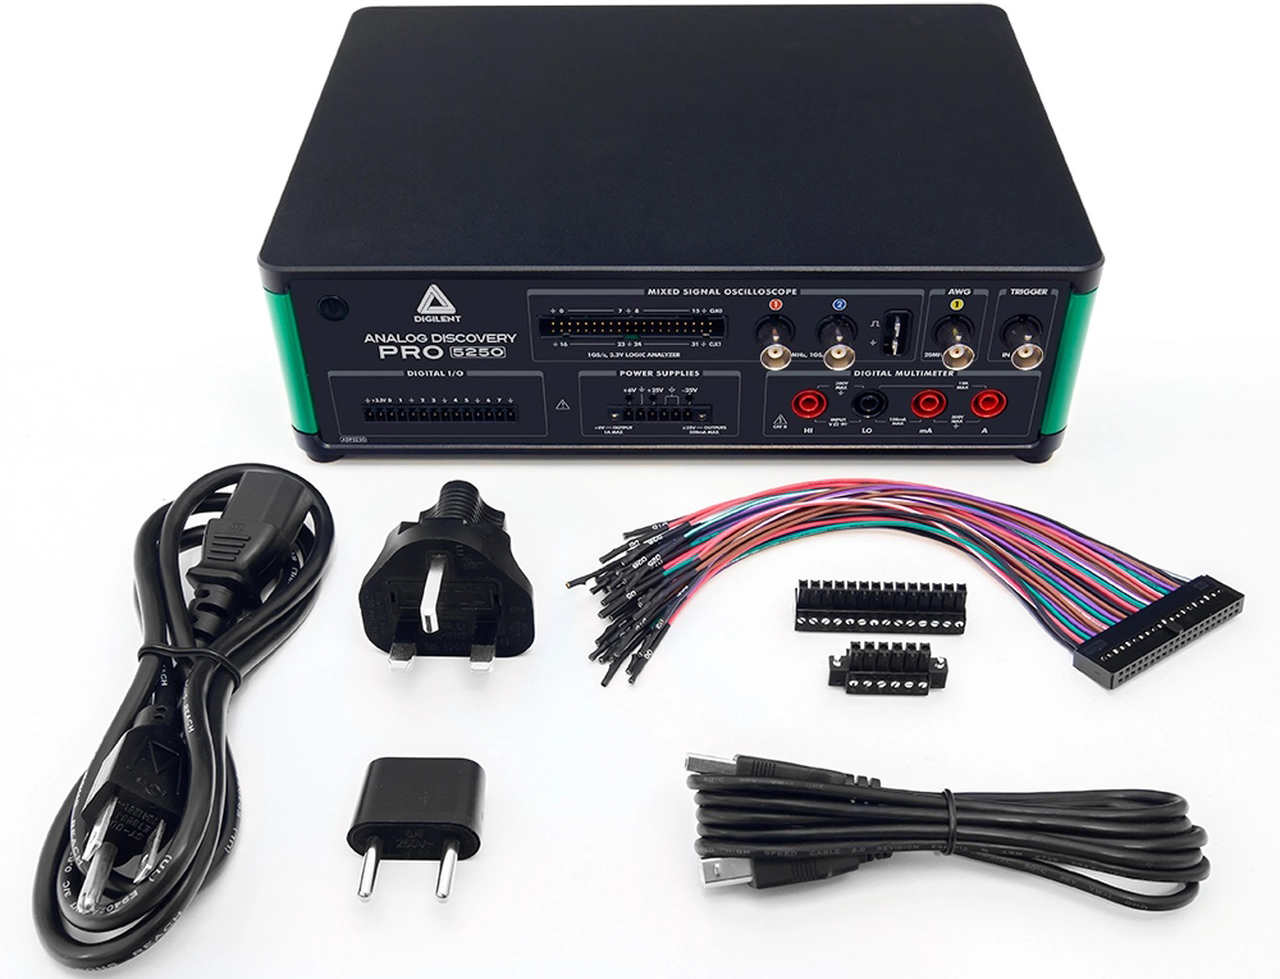 Analog Discovery Pro ADP5250 All-In-One 1GS/s 100MHz - Click to Enlarge